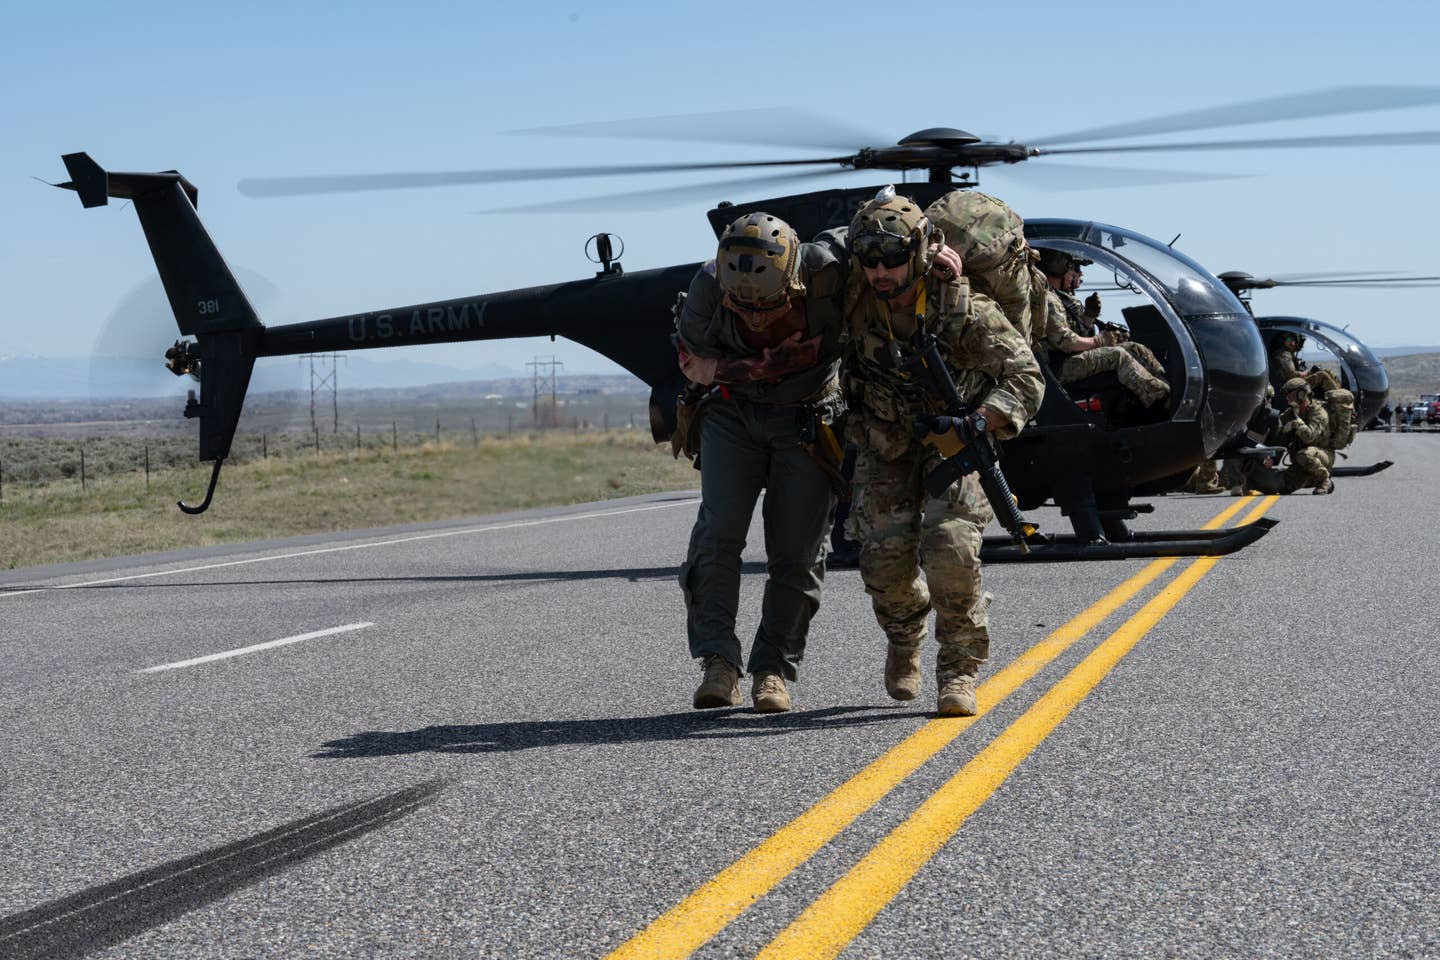 Members of the U.S. Army’s 160th Special Operation Aviation Regiment and U.S. Air Force’s 123rd Special Tactics Squadron participate in a search and rescue scenario as part of Exercise Agile Chariot, near Riverton, Wyoming, May 2, 2023. <em>U.S. Air Force photo by Senior Airman Natalie Fiorilli</em><br>